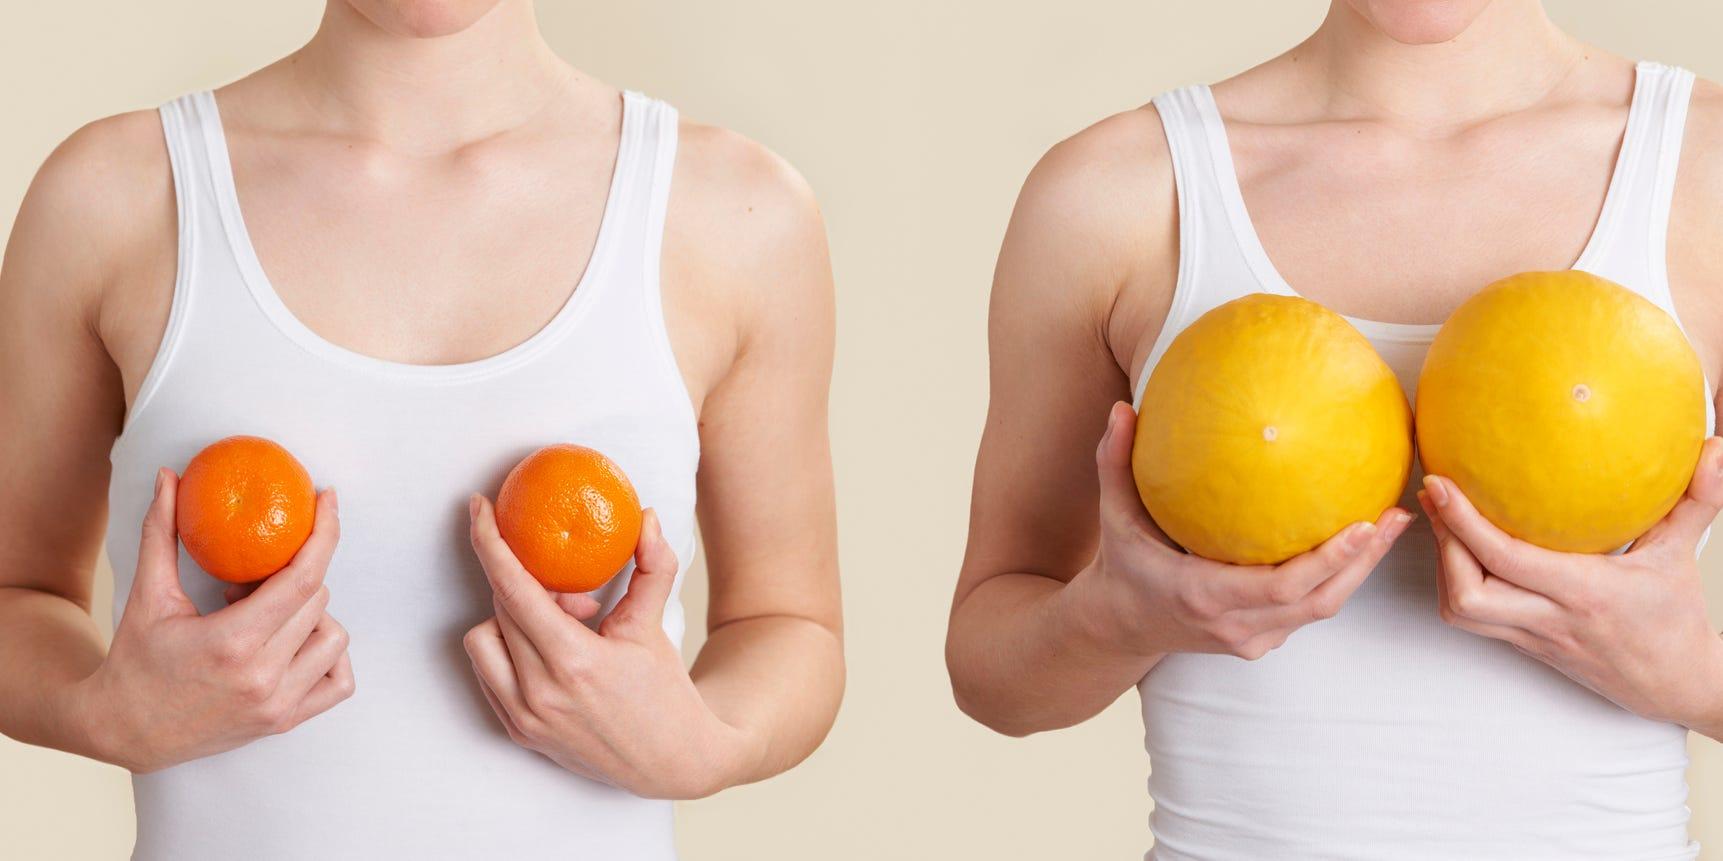 3 exercises that can make your boobs look bigger and other options for brea...